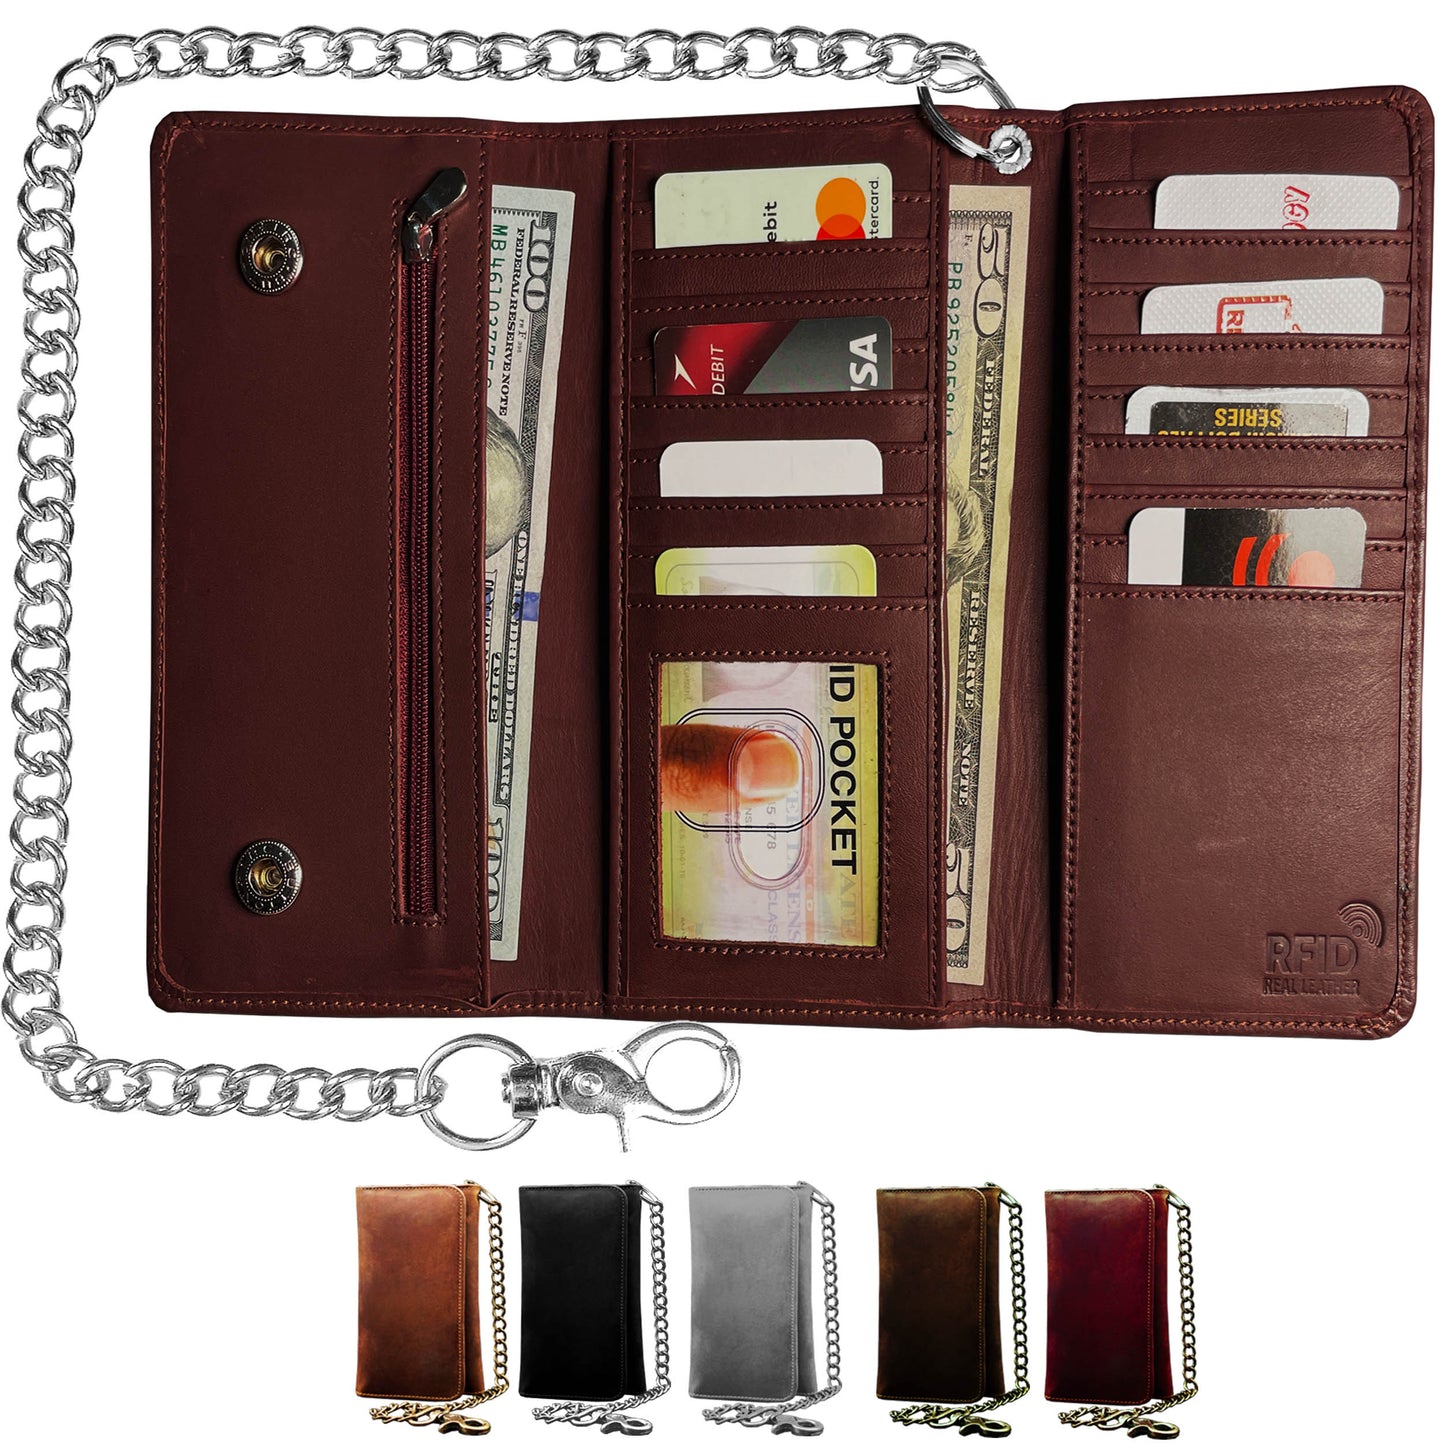 IBRO Motorcycle Chain Wallet for Men – 100% Natural Genuine Leather, Long Trifold RFID Blocking Wallet OXBlood